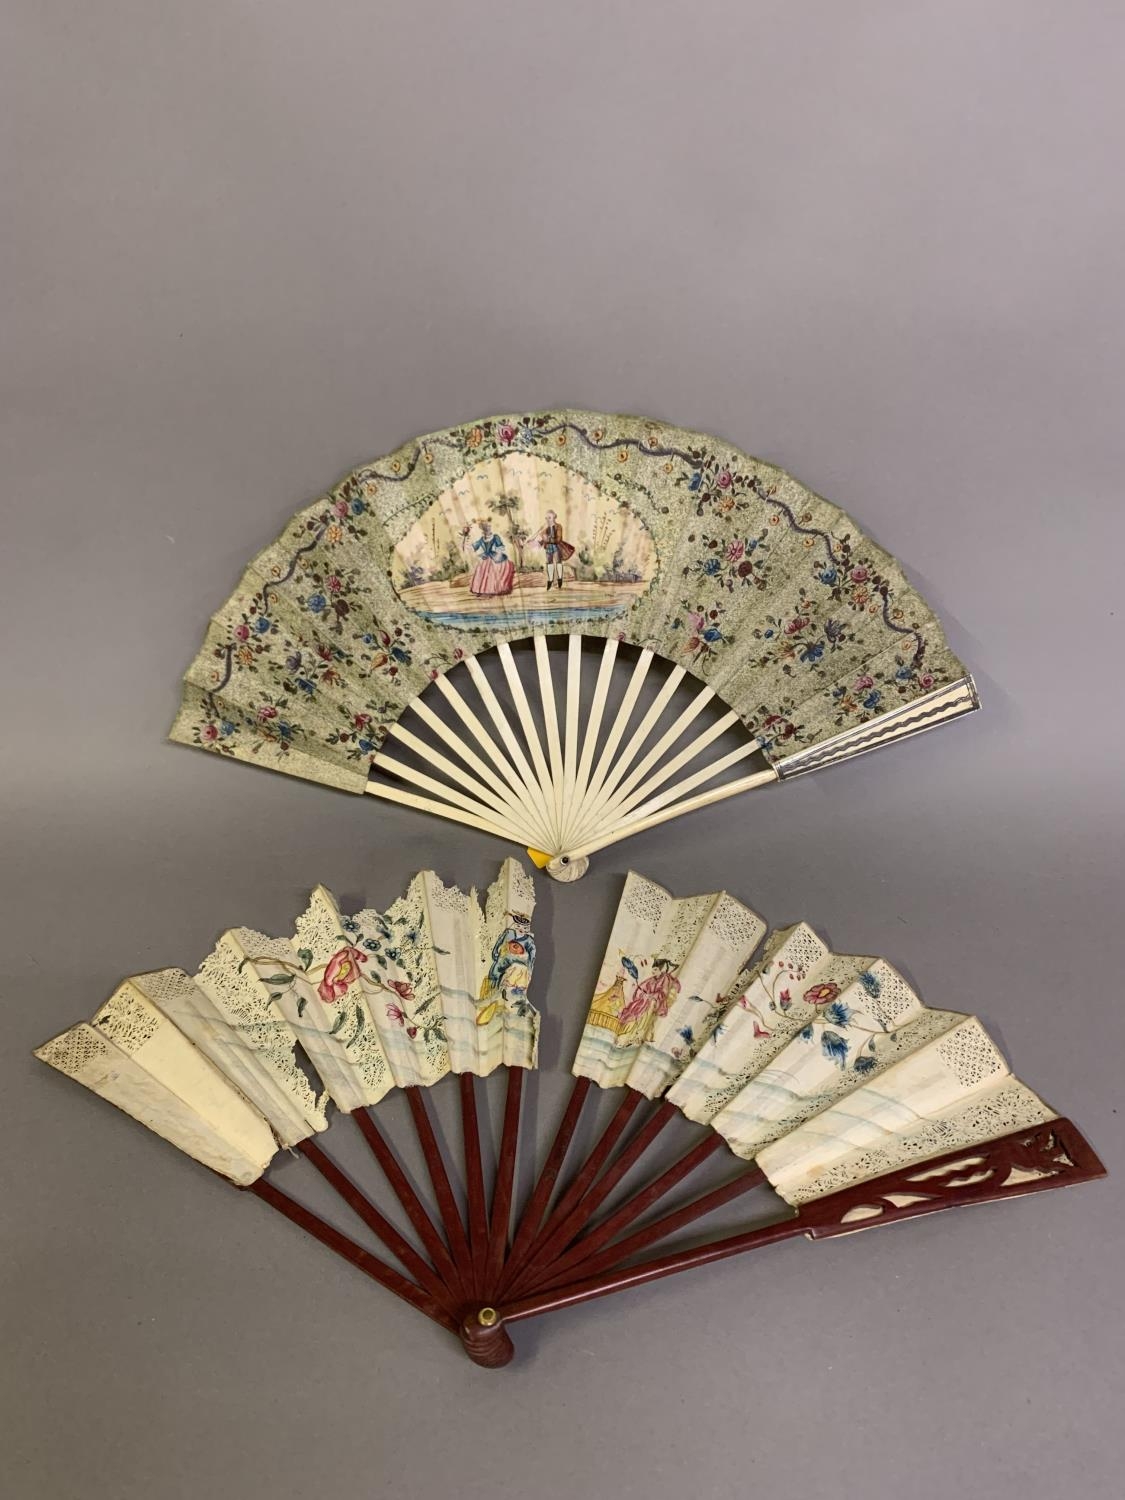 The 18th century: a very classical folding fan, the double paper leaf with central cartouche showing